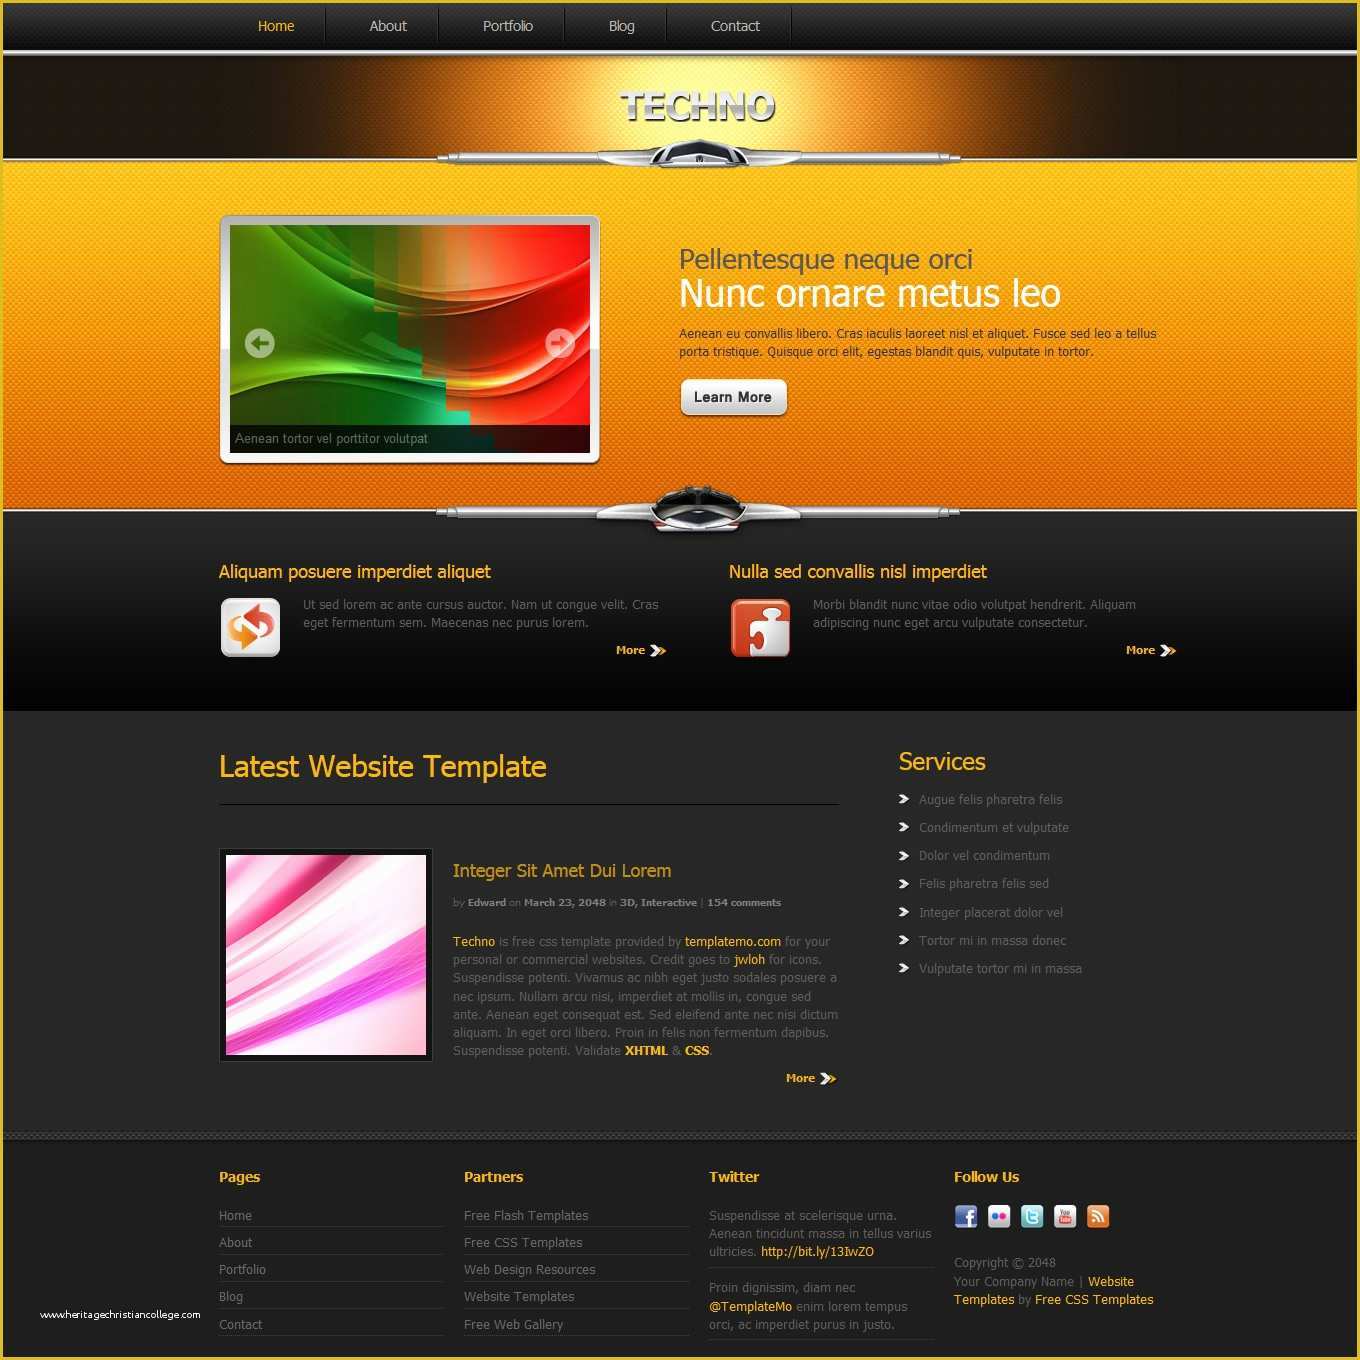 Free HTML Css Templates Of Best Free Css Templates for the Year 2012